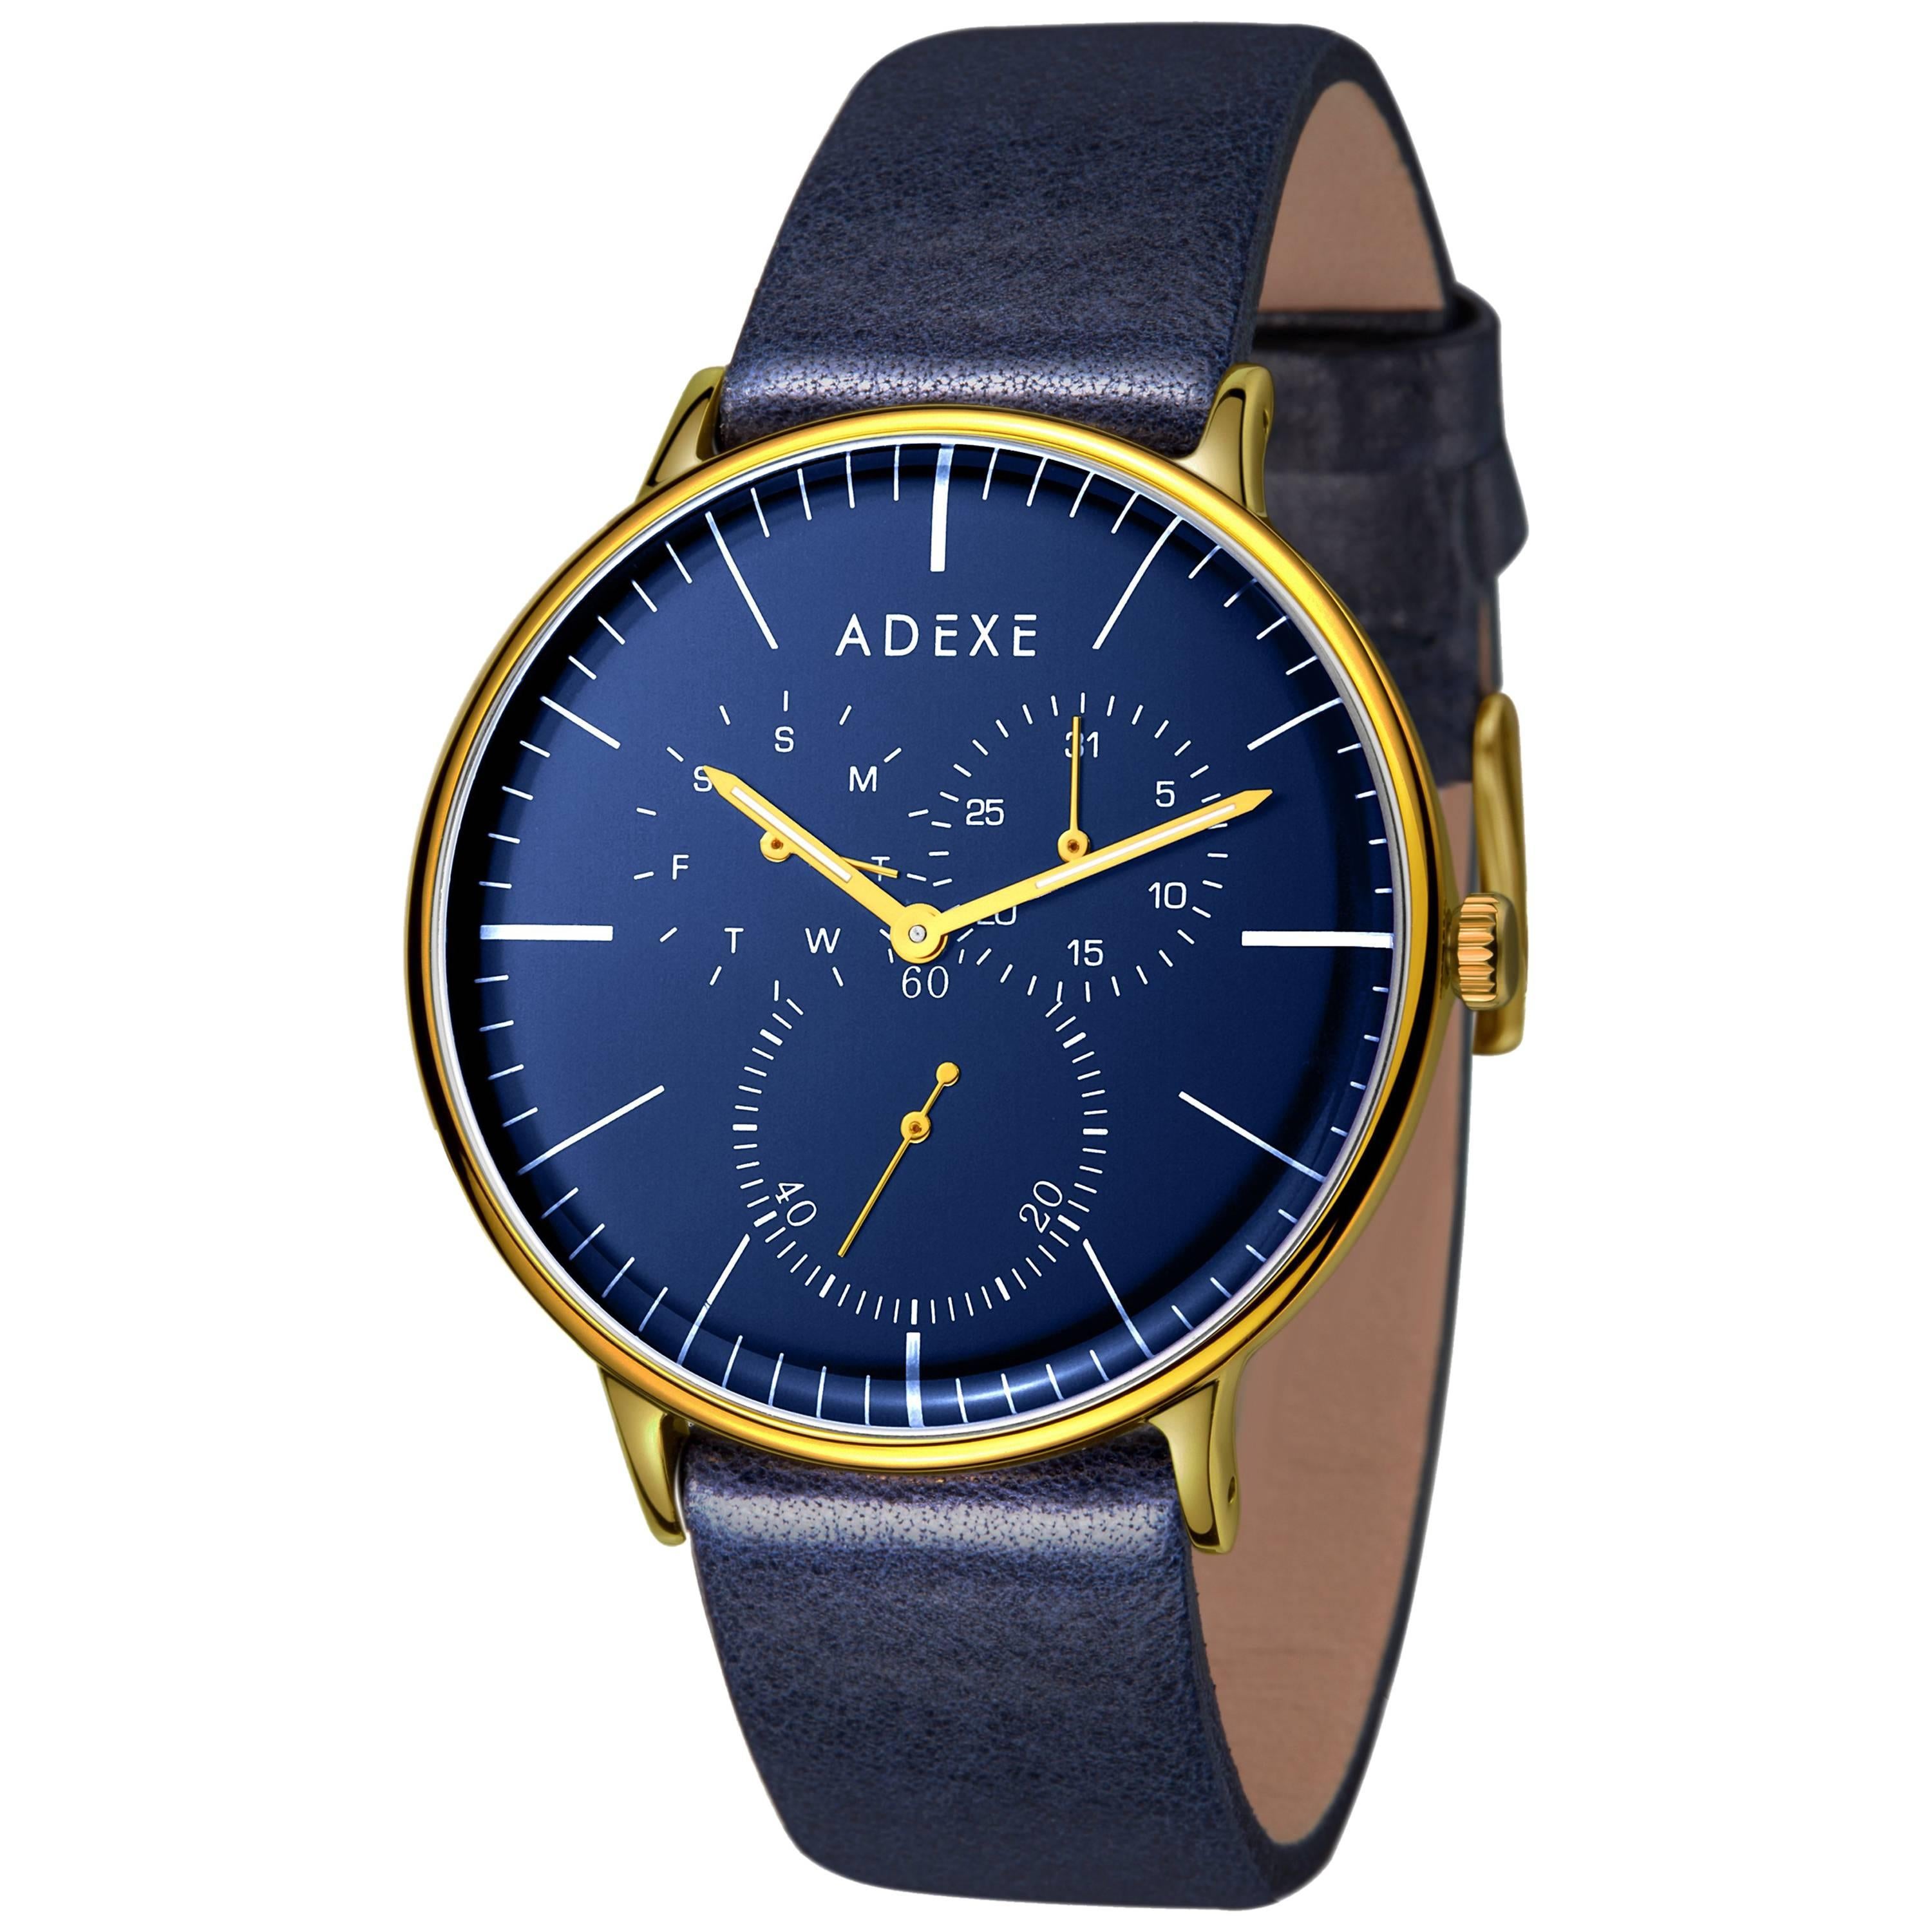 'They' Blue and Gold Limited Edition Wristwatch